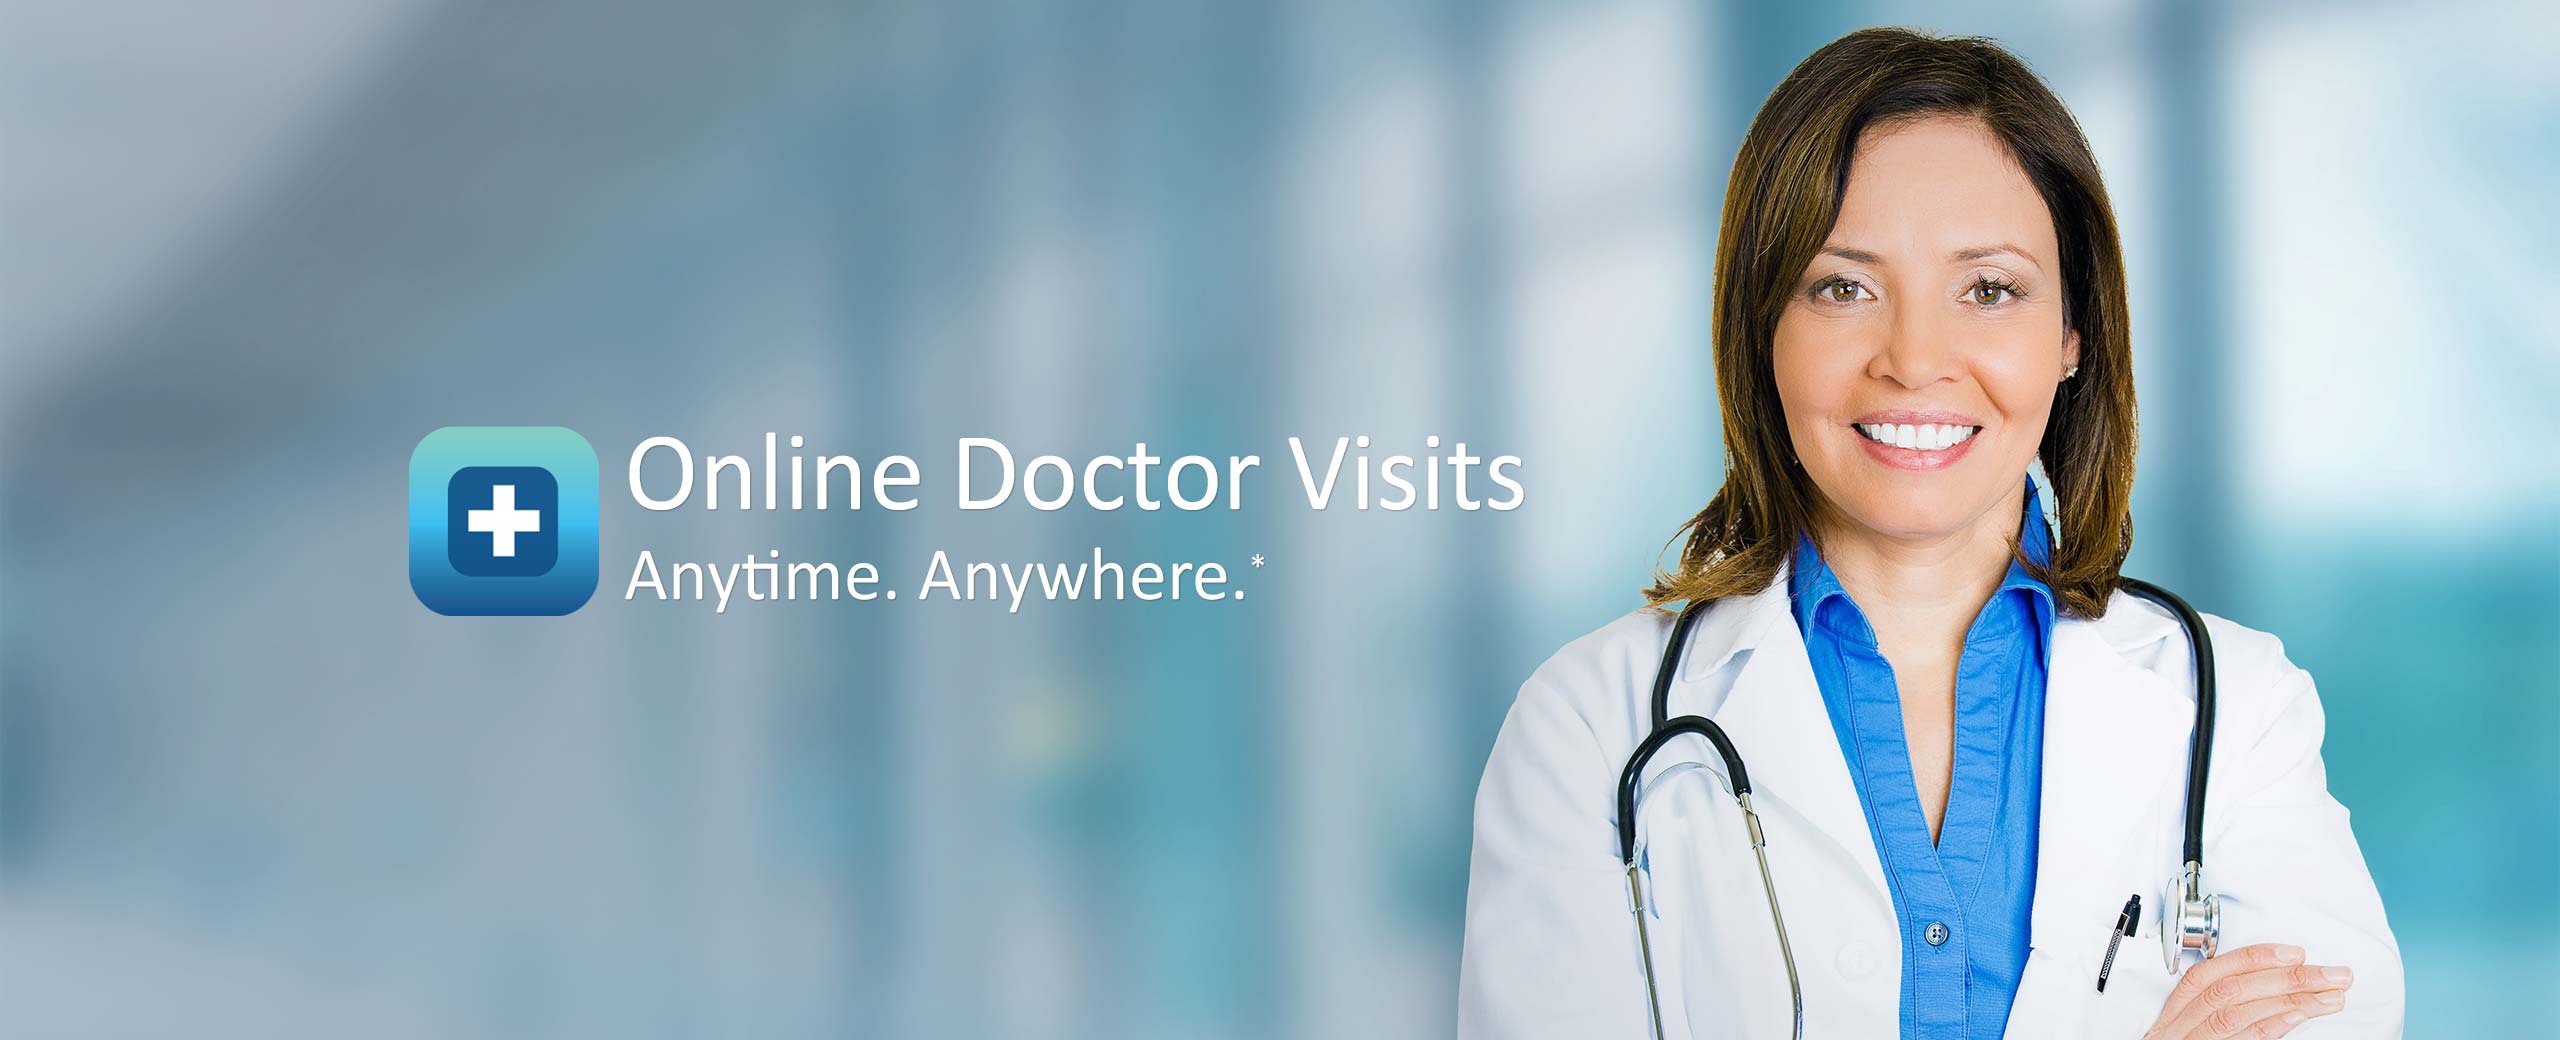 Telemedicine. Online Doctor Visits Anytime Anywhere.